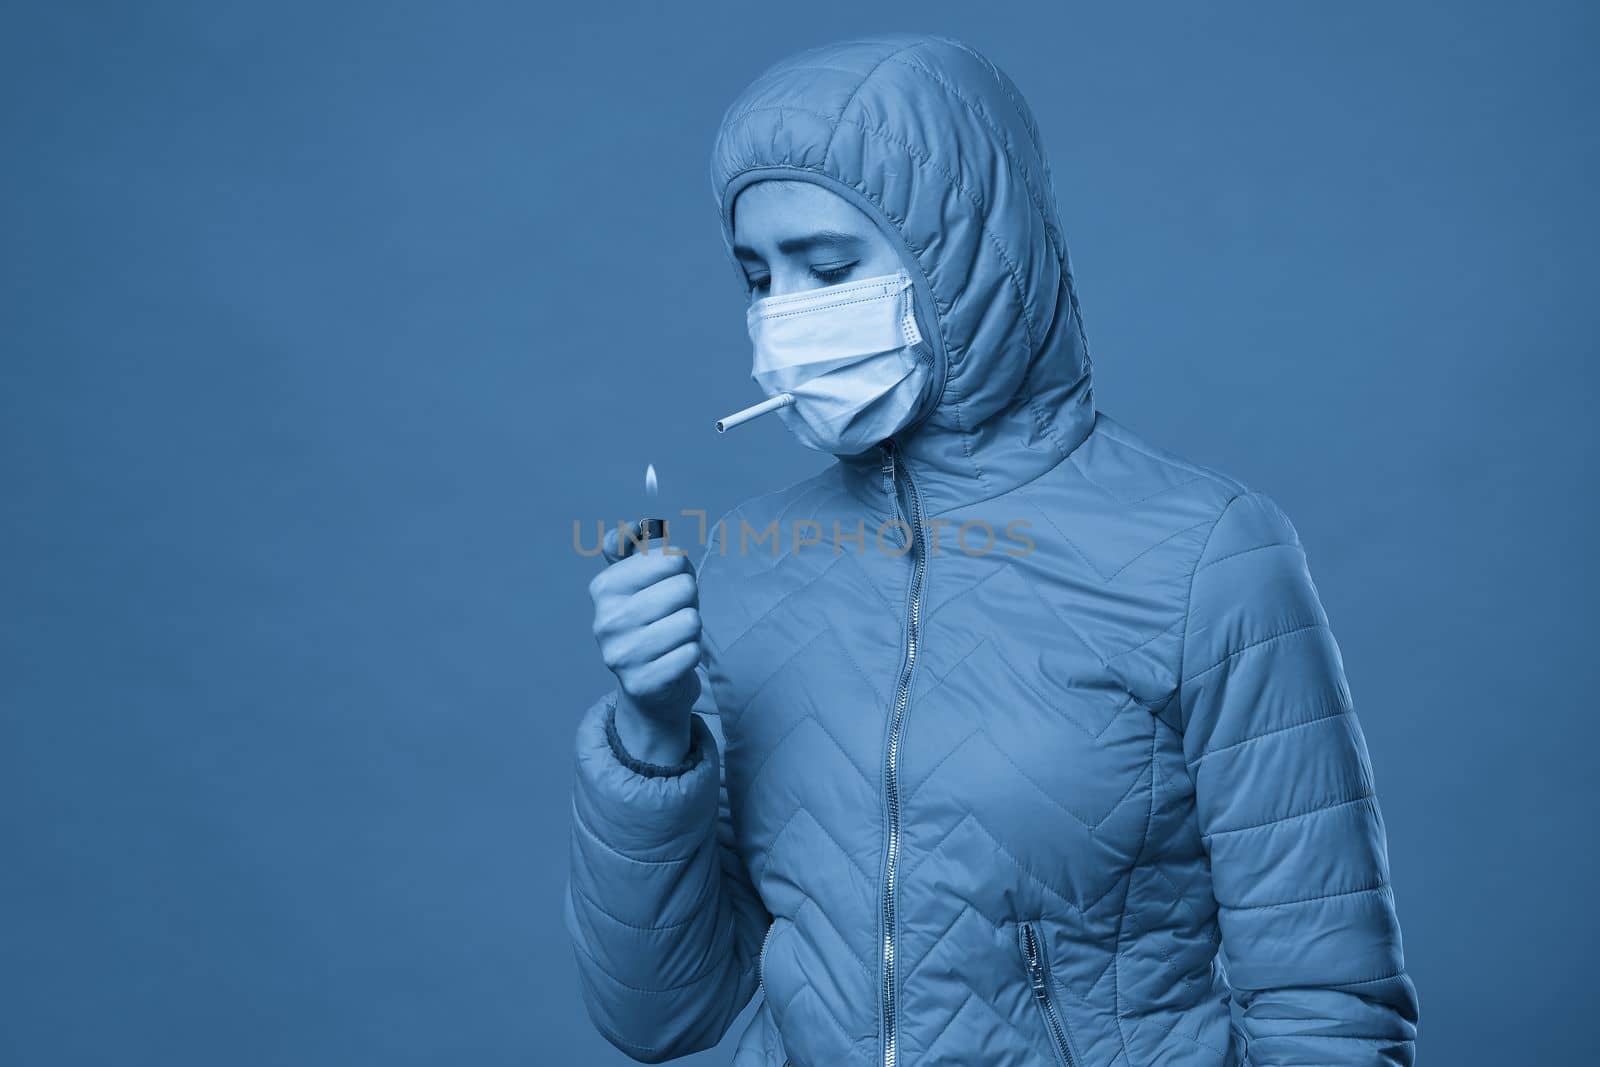 Young girl wearing medical protective mask lights up, holding a cigarette in her mouth through the mask. Copy space, close up